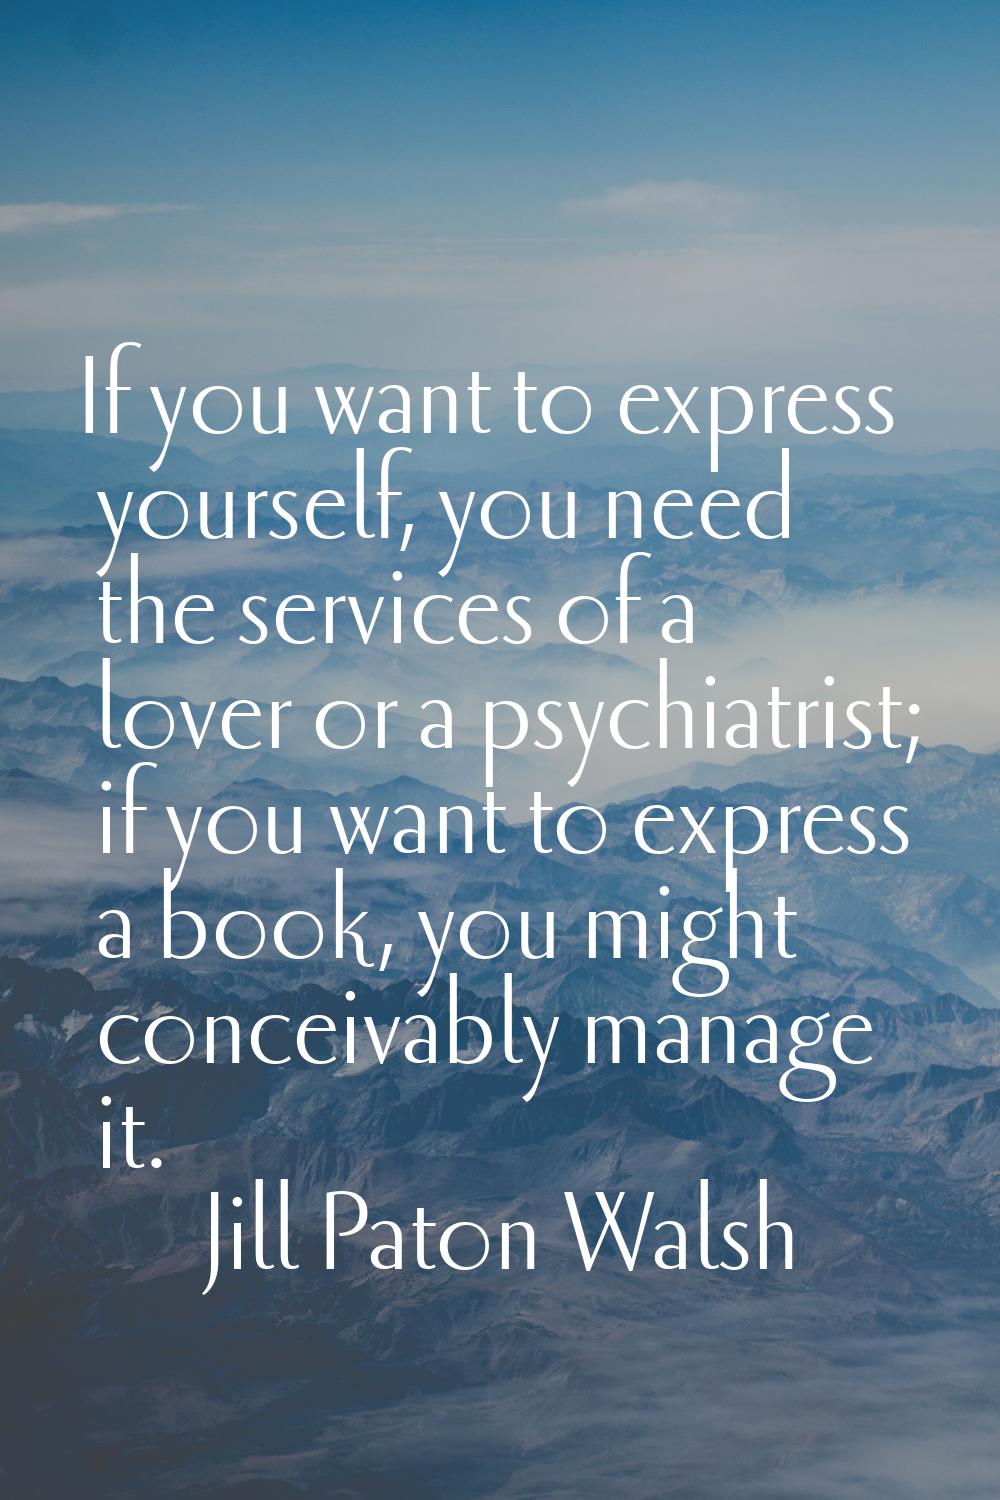 If you want to express yourself, you need the services of a lover or a psychiatrist; if you want to